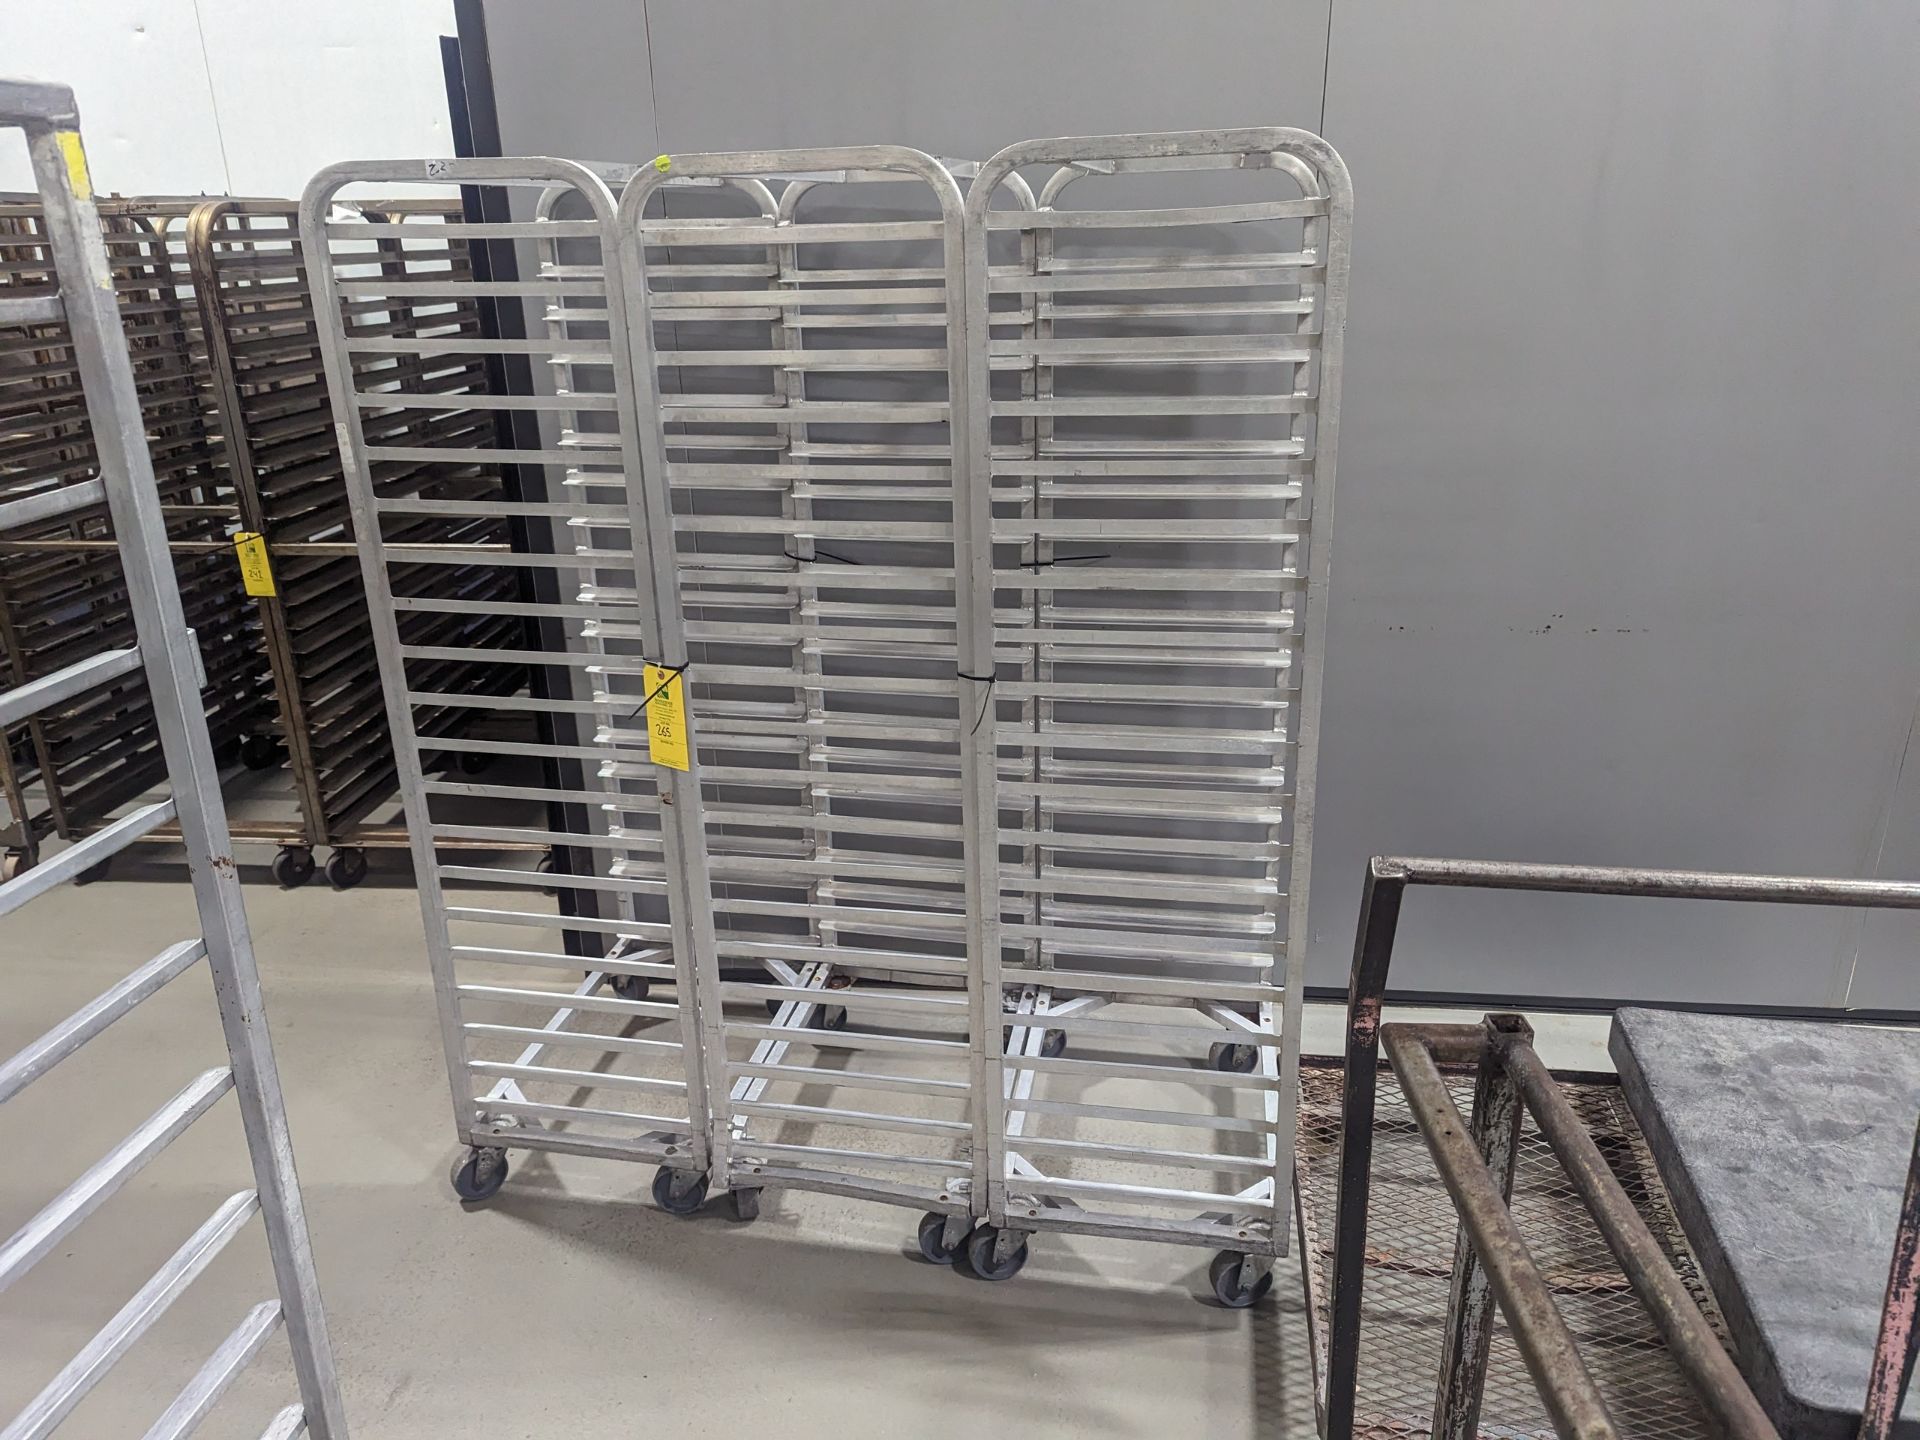 Lot of 3 Aluminum Racks, Dimensions LxWxH: 57x29x69 Measurements are for lot of 3 together